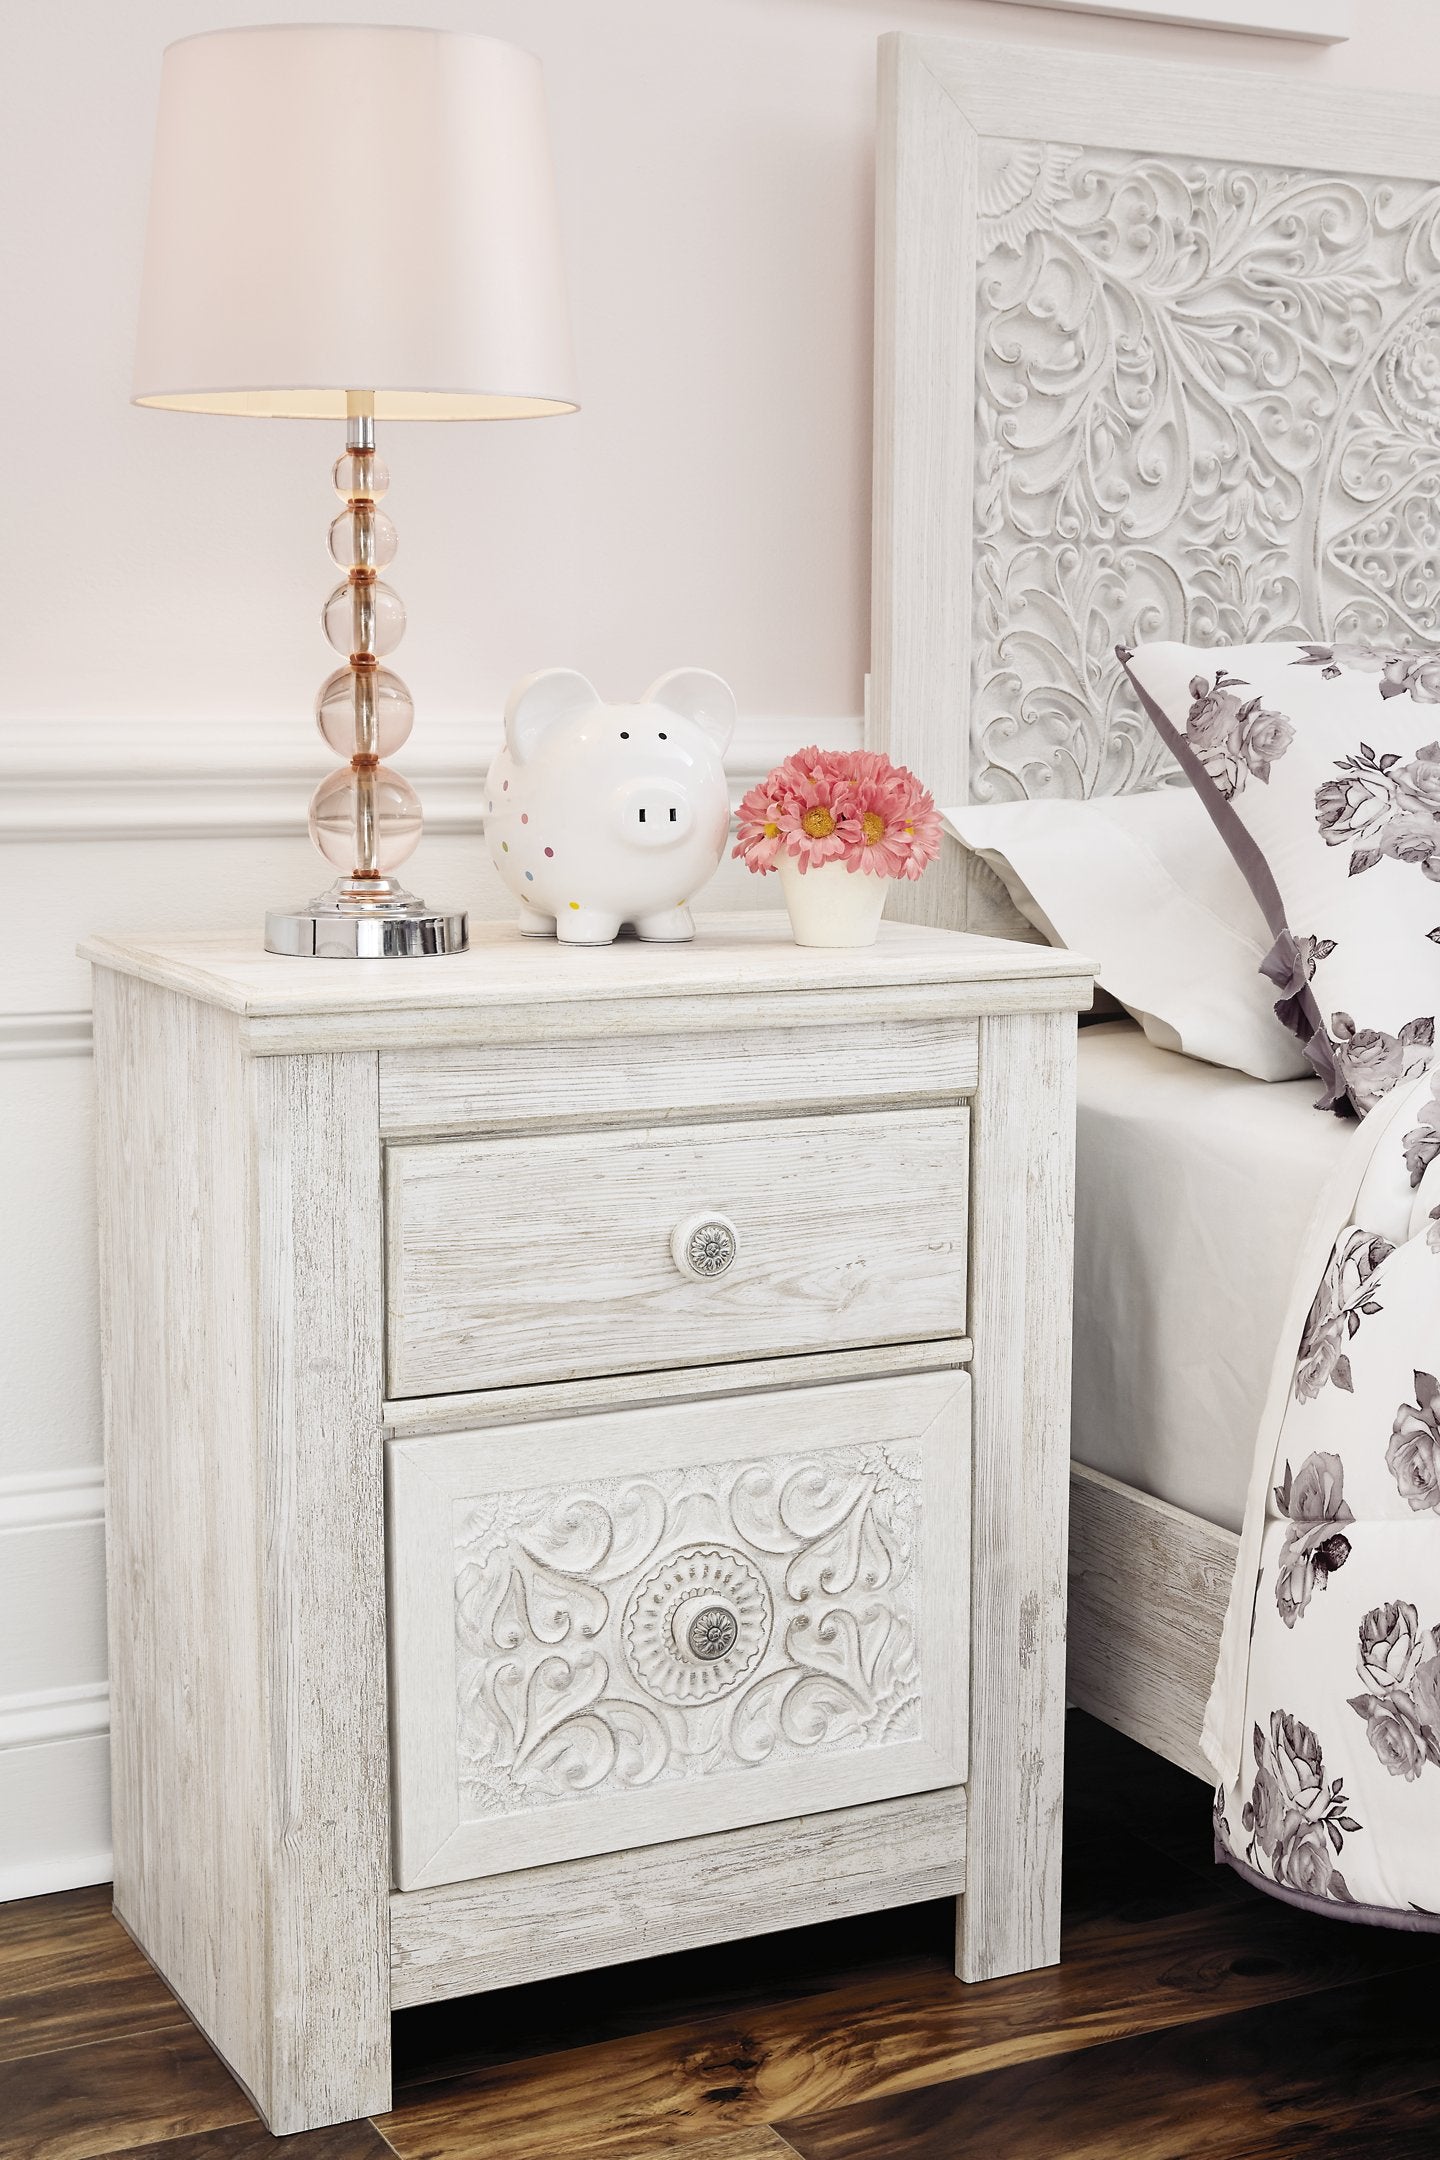 Paxberry Youth Nightstand - Half Price Furniture